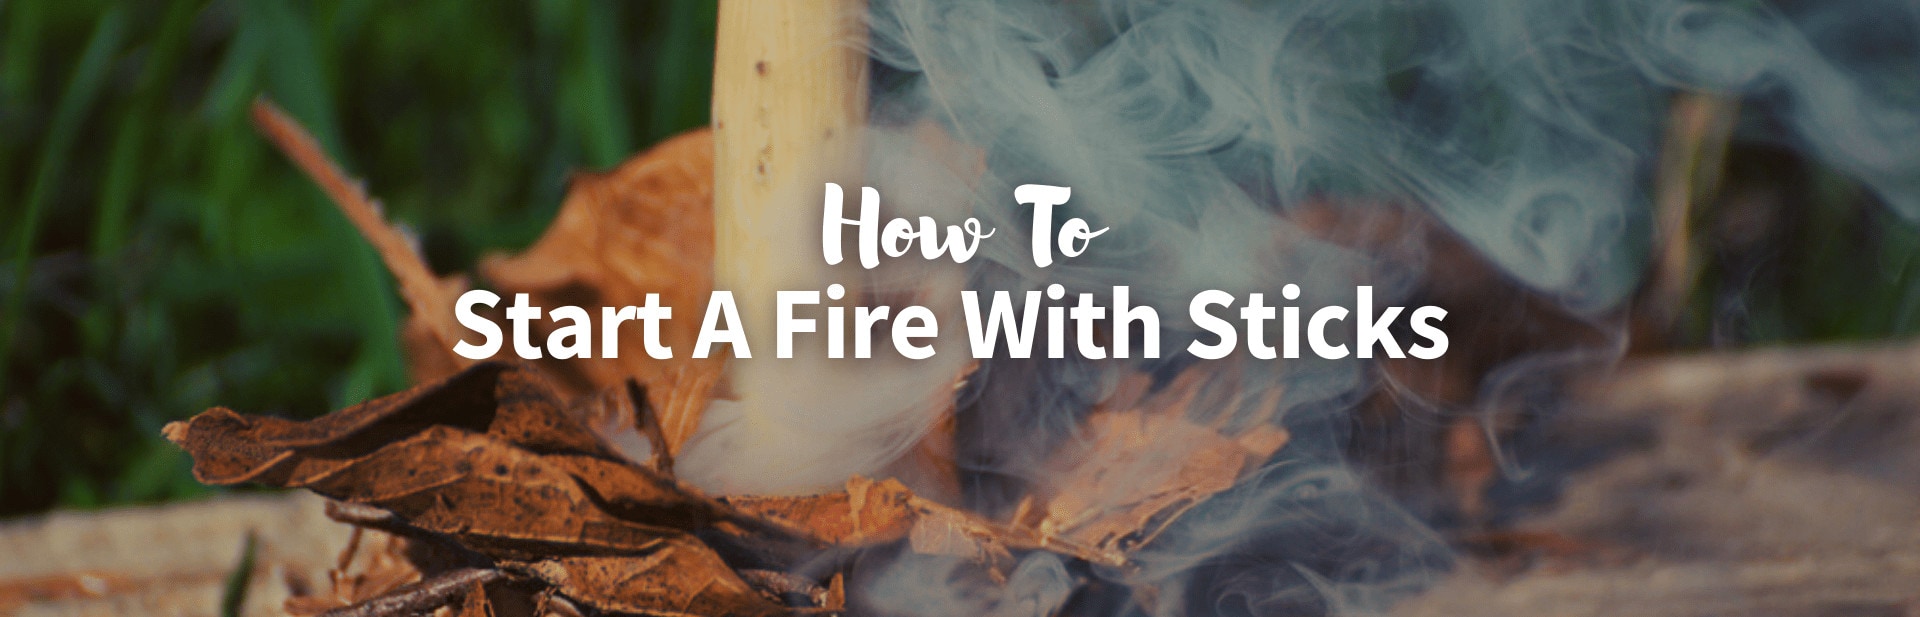 How to Start a Fire with Sticks